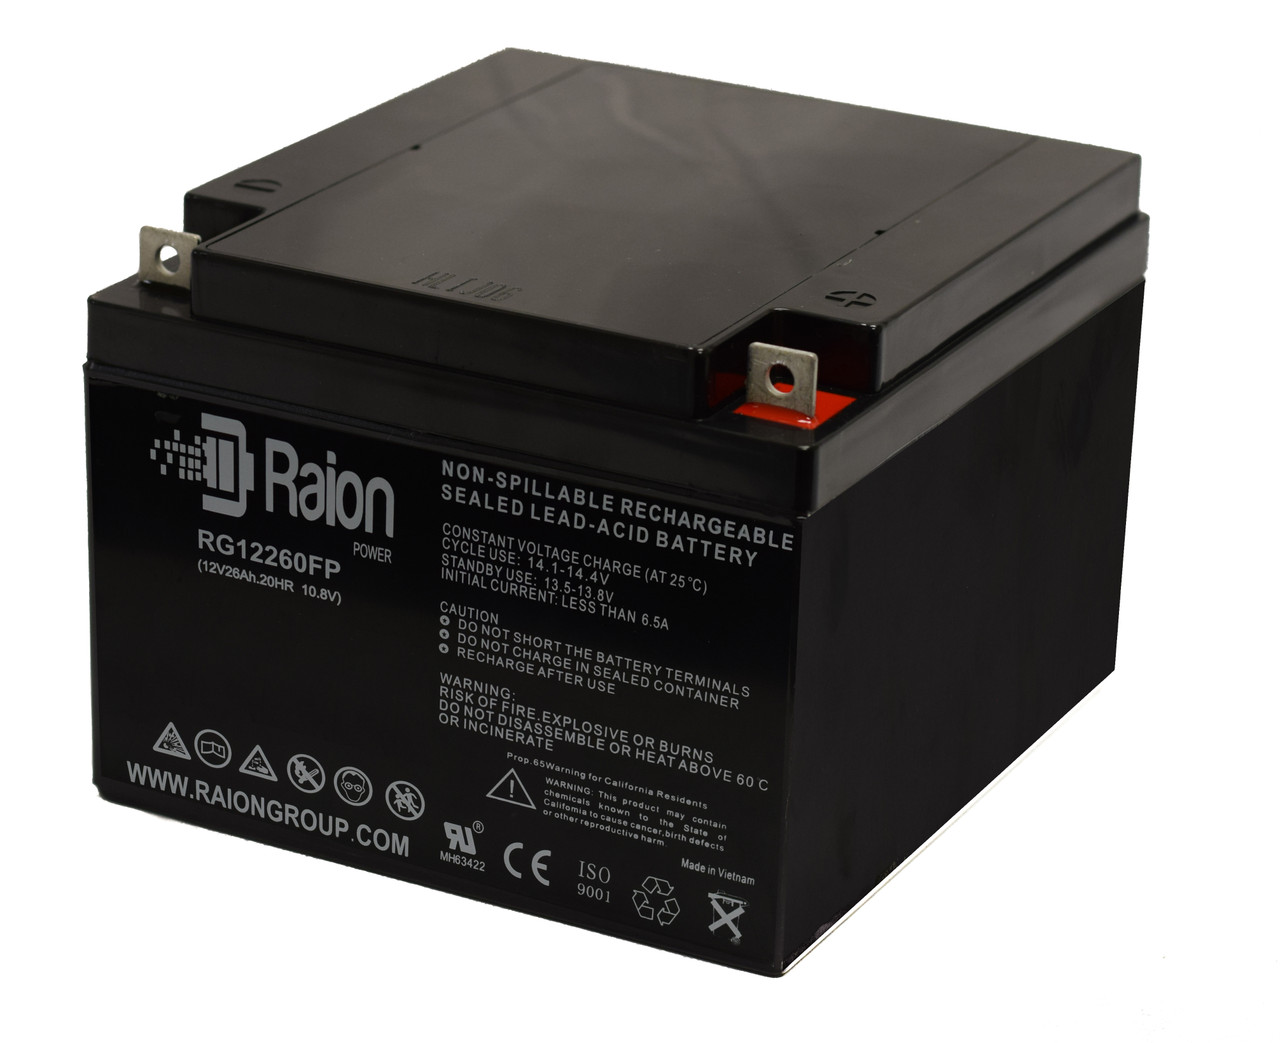 Raion Power Replacement 12V 26Ah Battery for MCA NP26-12AT - 1 Pack